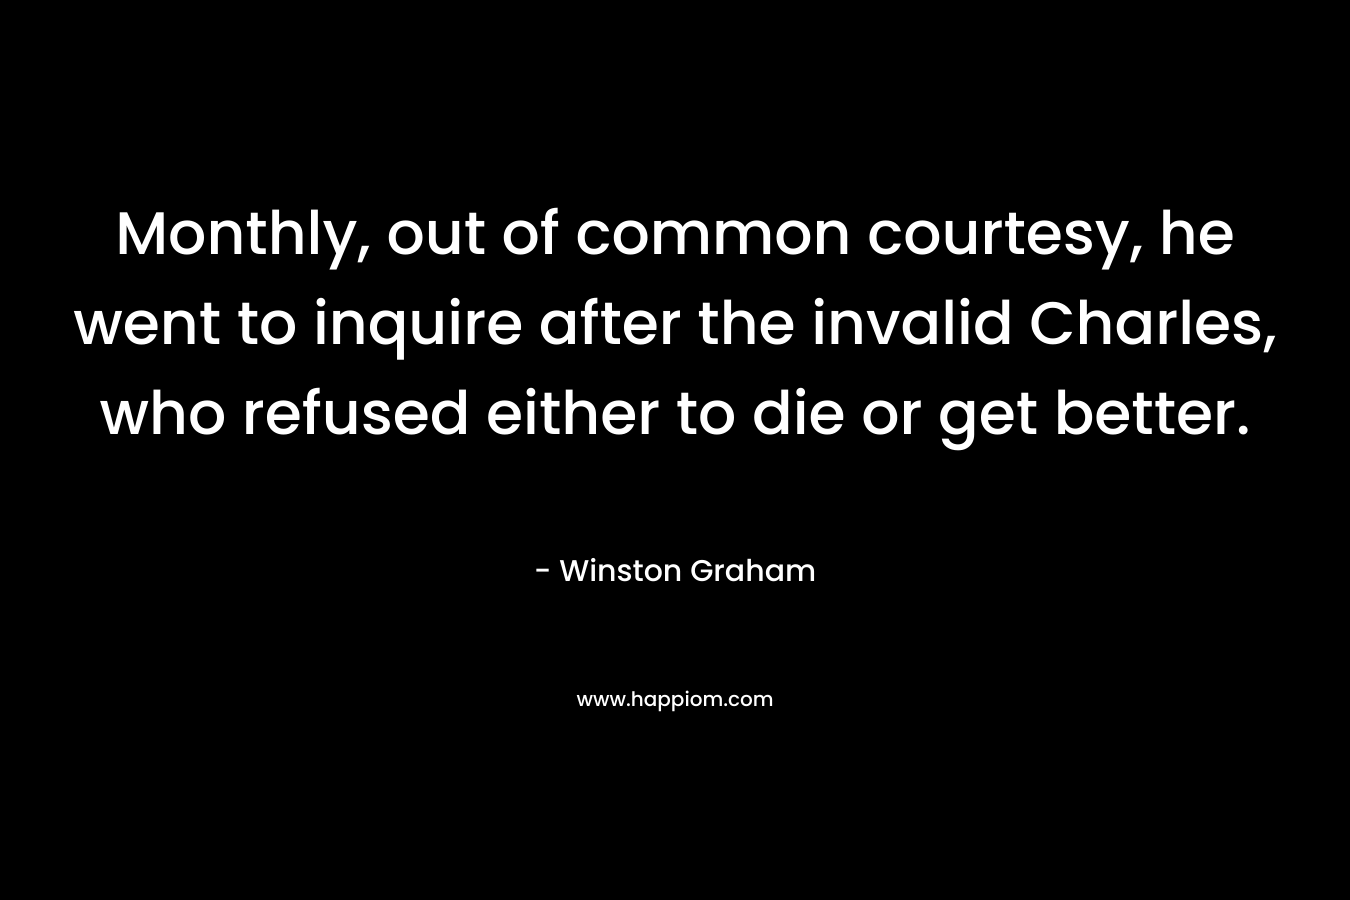 Monthly, out of common courtesy, he went to inquire after the invalid Charles, who refused either to die or get better. – Winston Graham